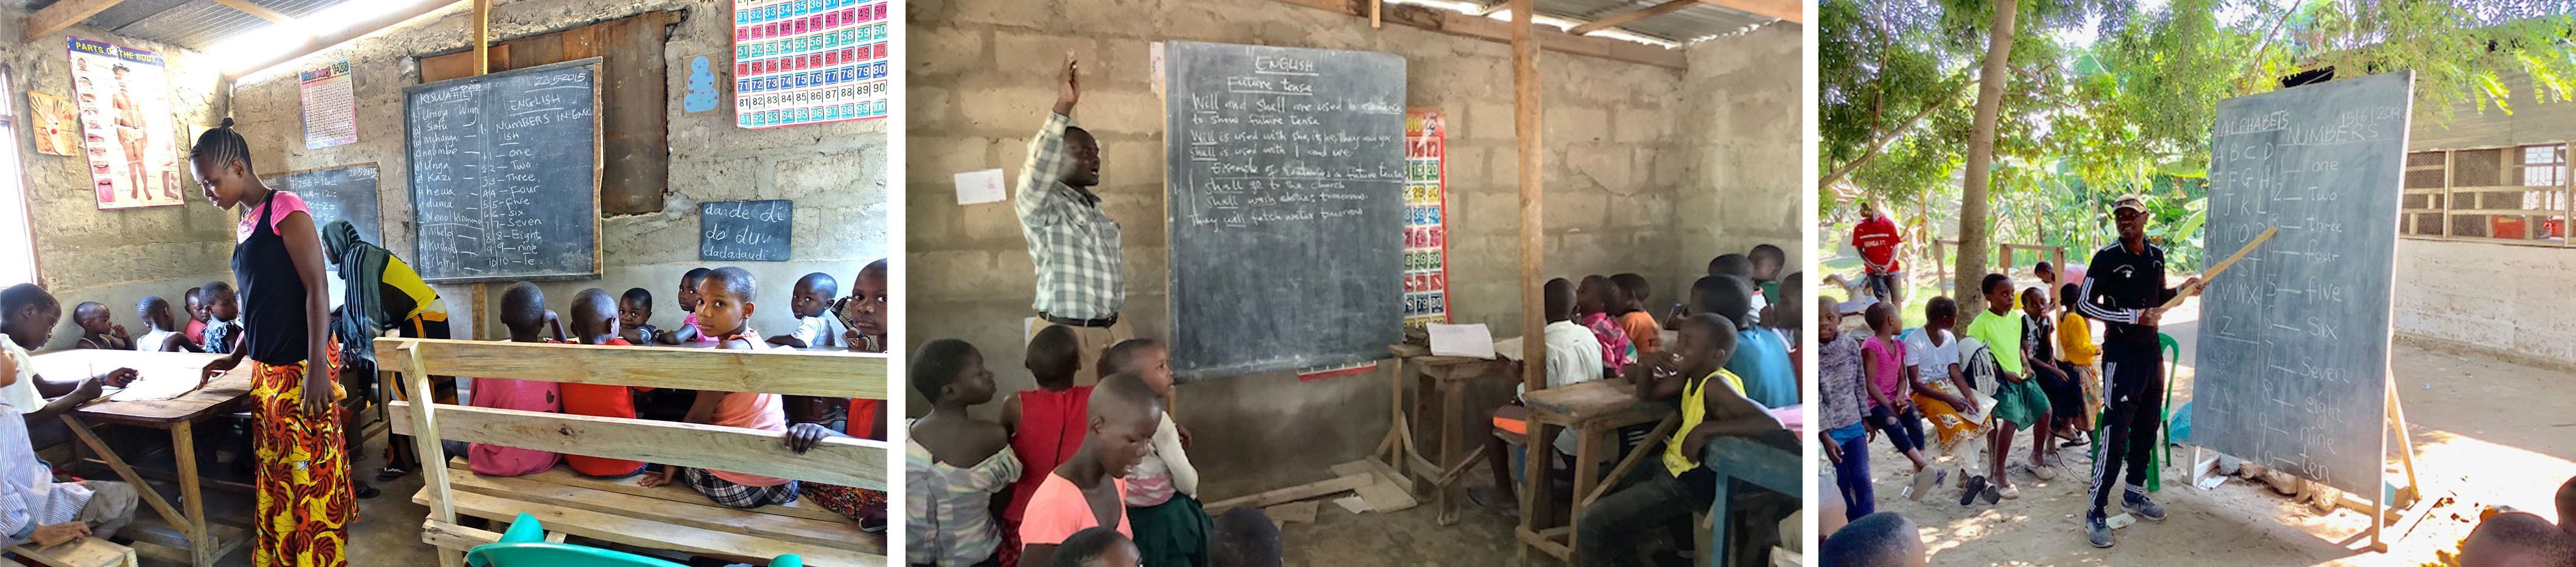 Collage of photos: 1. group of children in the classroom 2. a teacher teaching students in his classroom 3. a teacher teaching in an outdoor classroom.